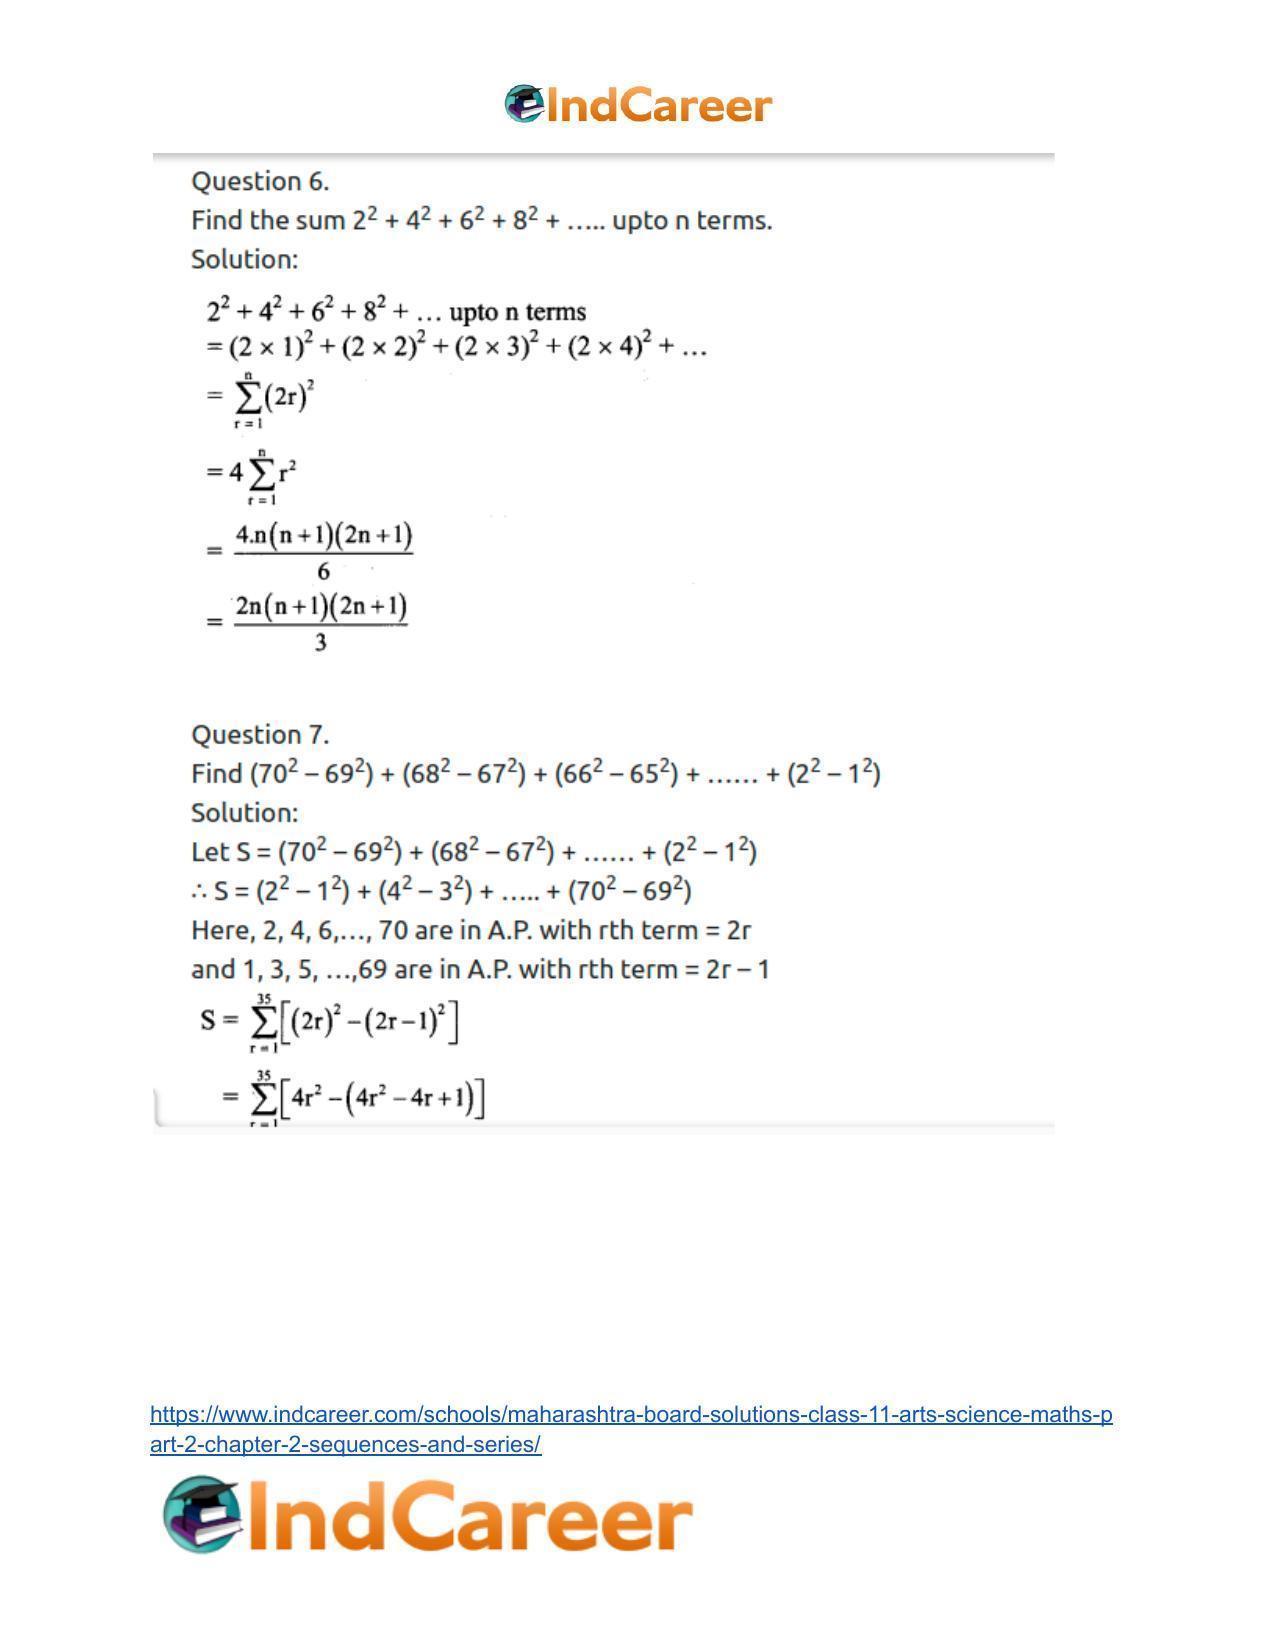 Maharashtra Board Solutions Class 11-Arts & Science Maths (Part 2): Chapter 2- Sequences and Series - Page 72